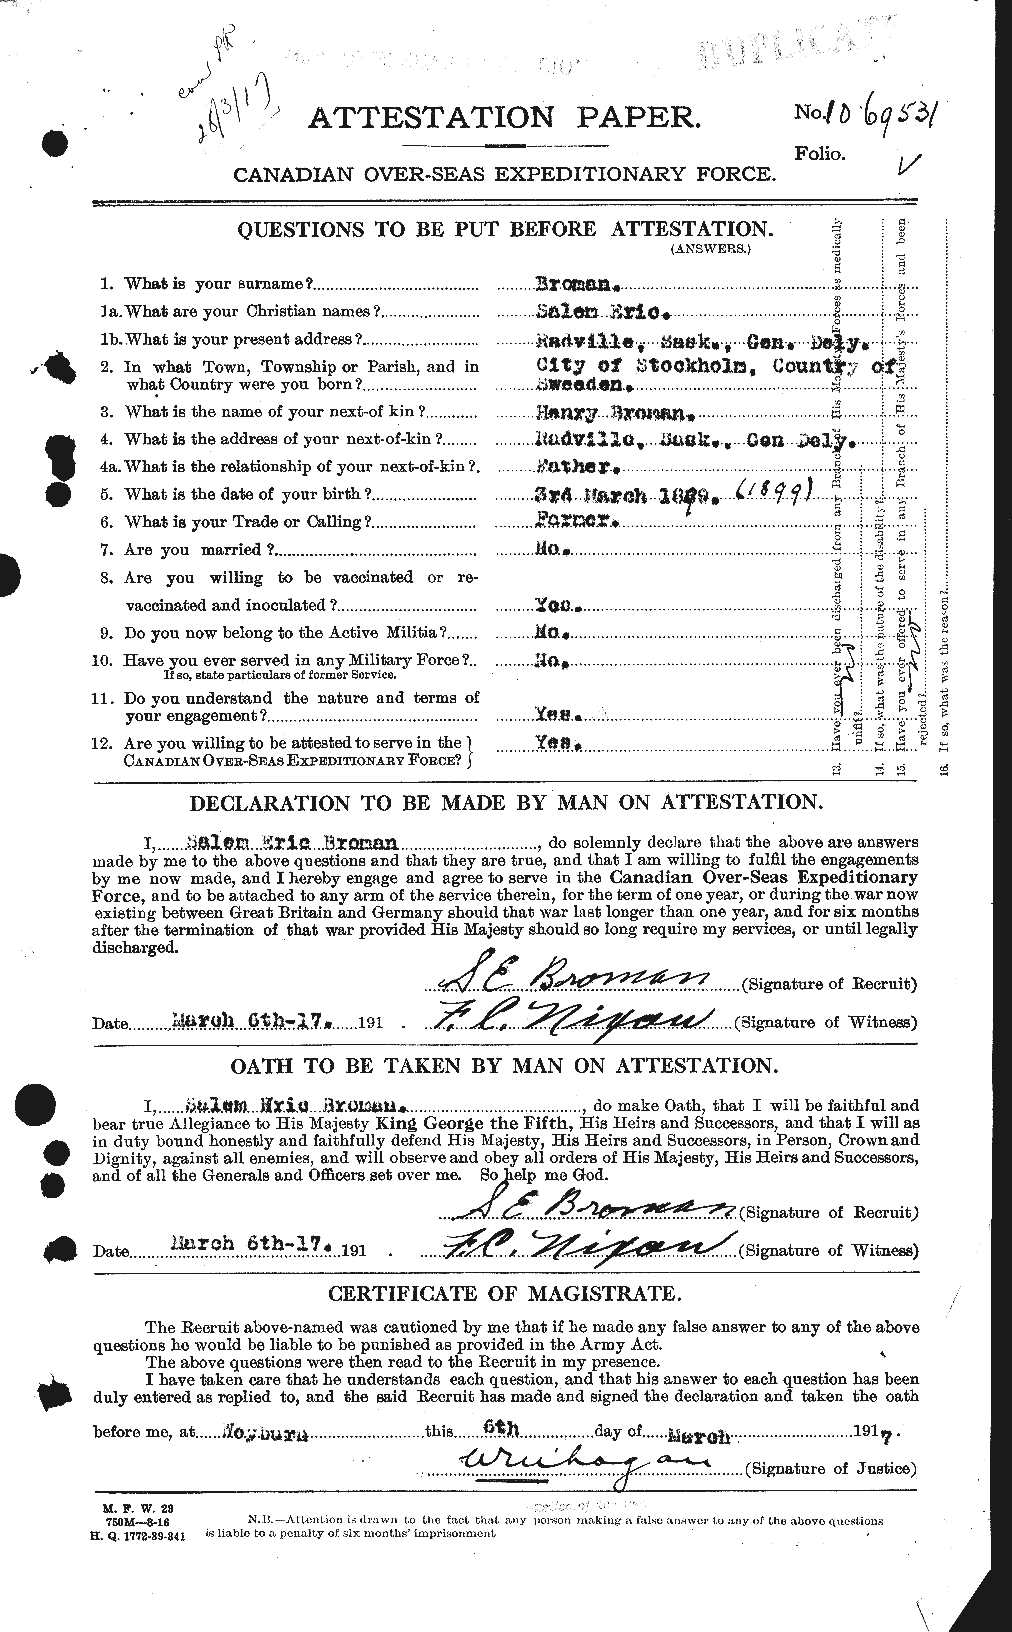 Personnel Records of the First World War - CEF 262124a